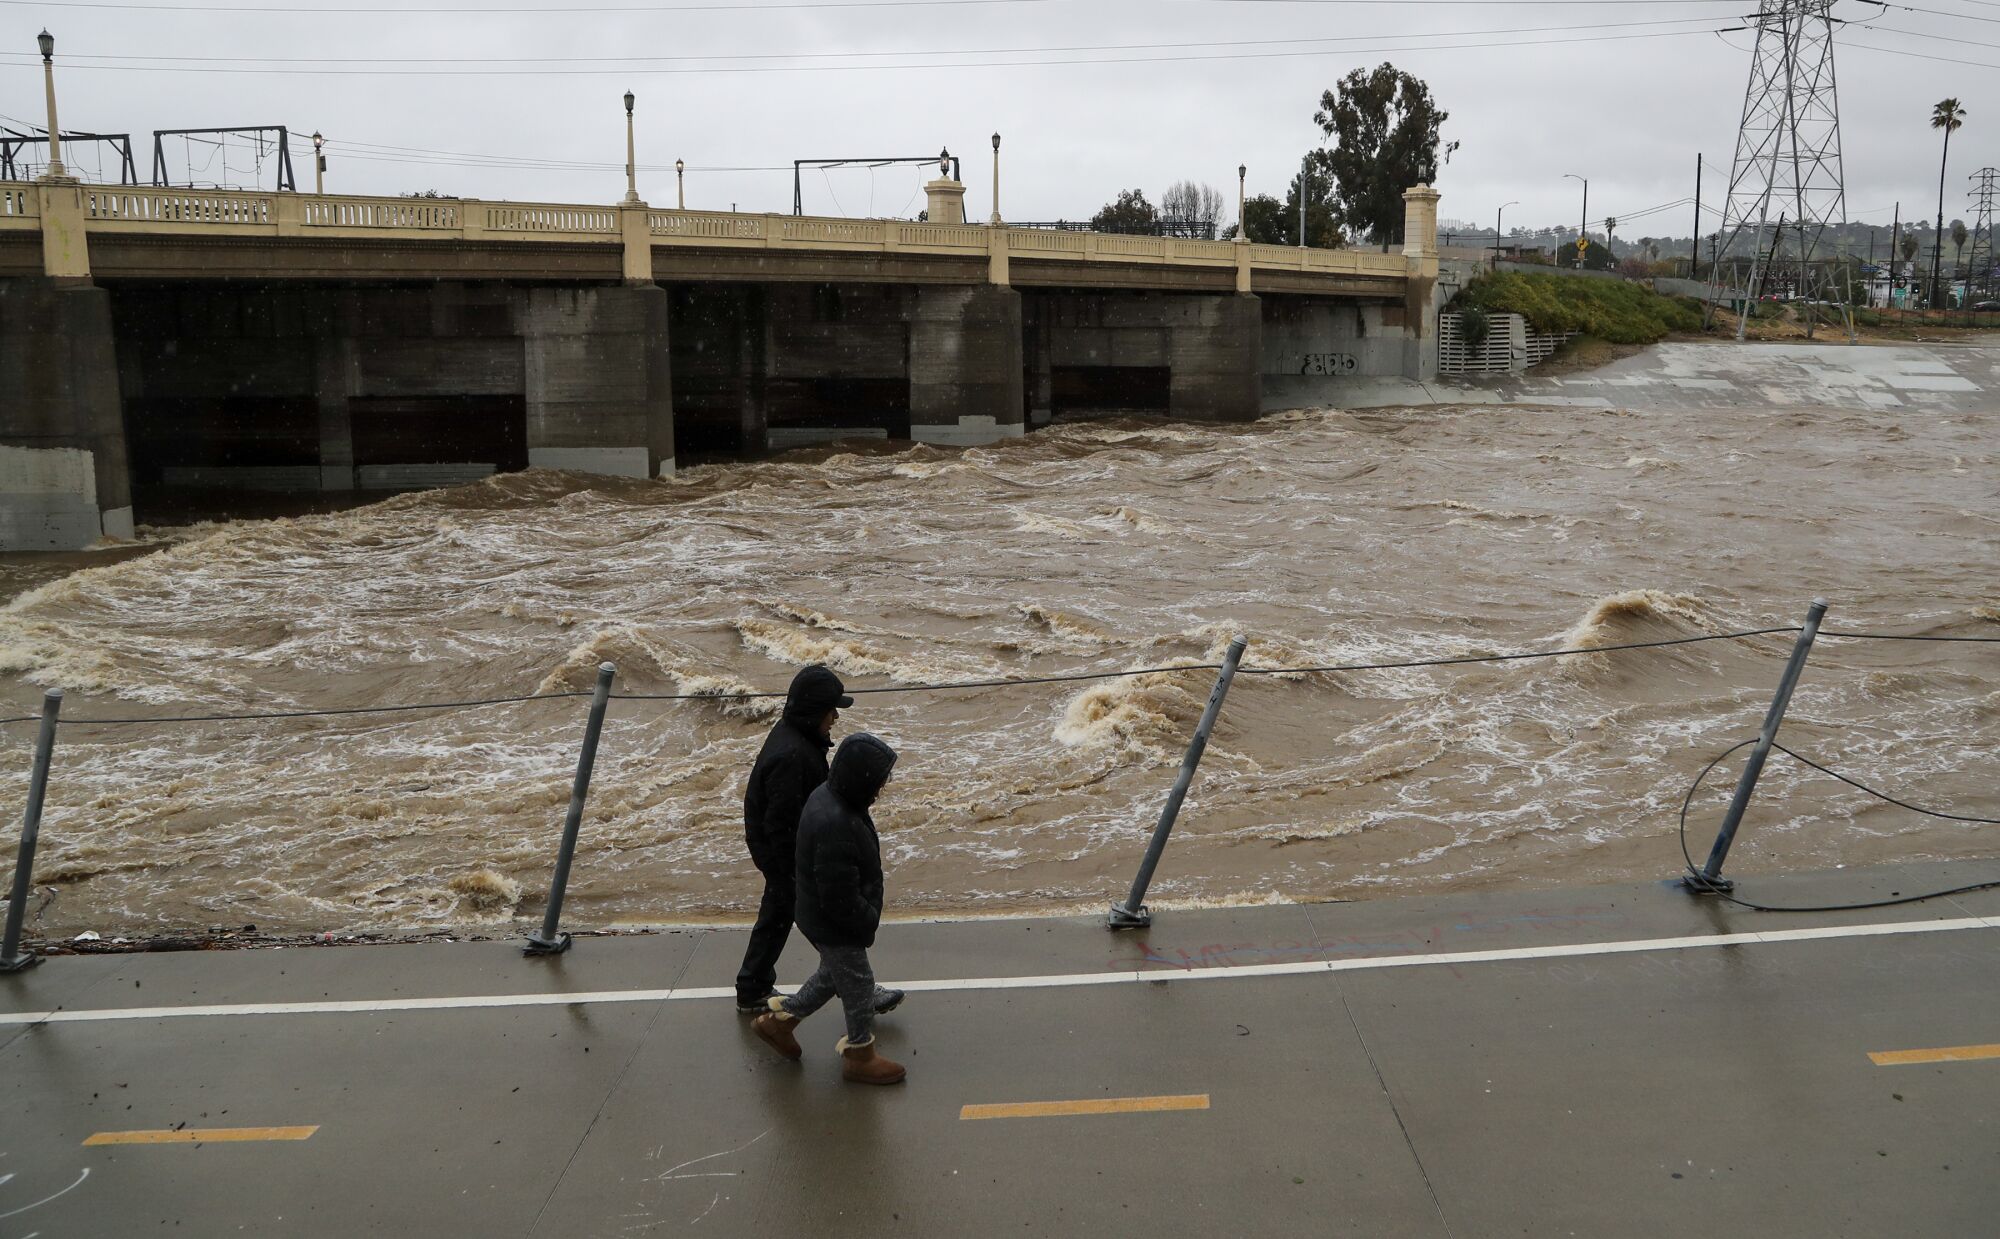 Pedestrians walk along the Los Angeles River in the Frogtown neighborhood on Saturday.